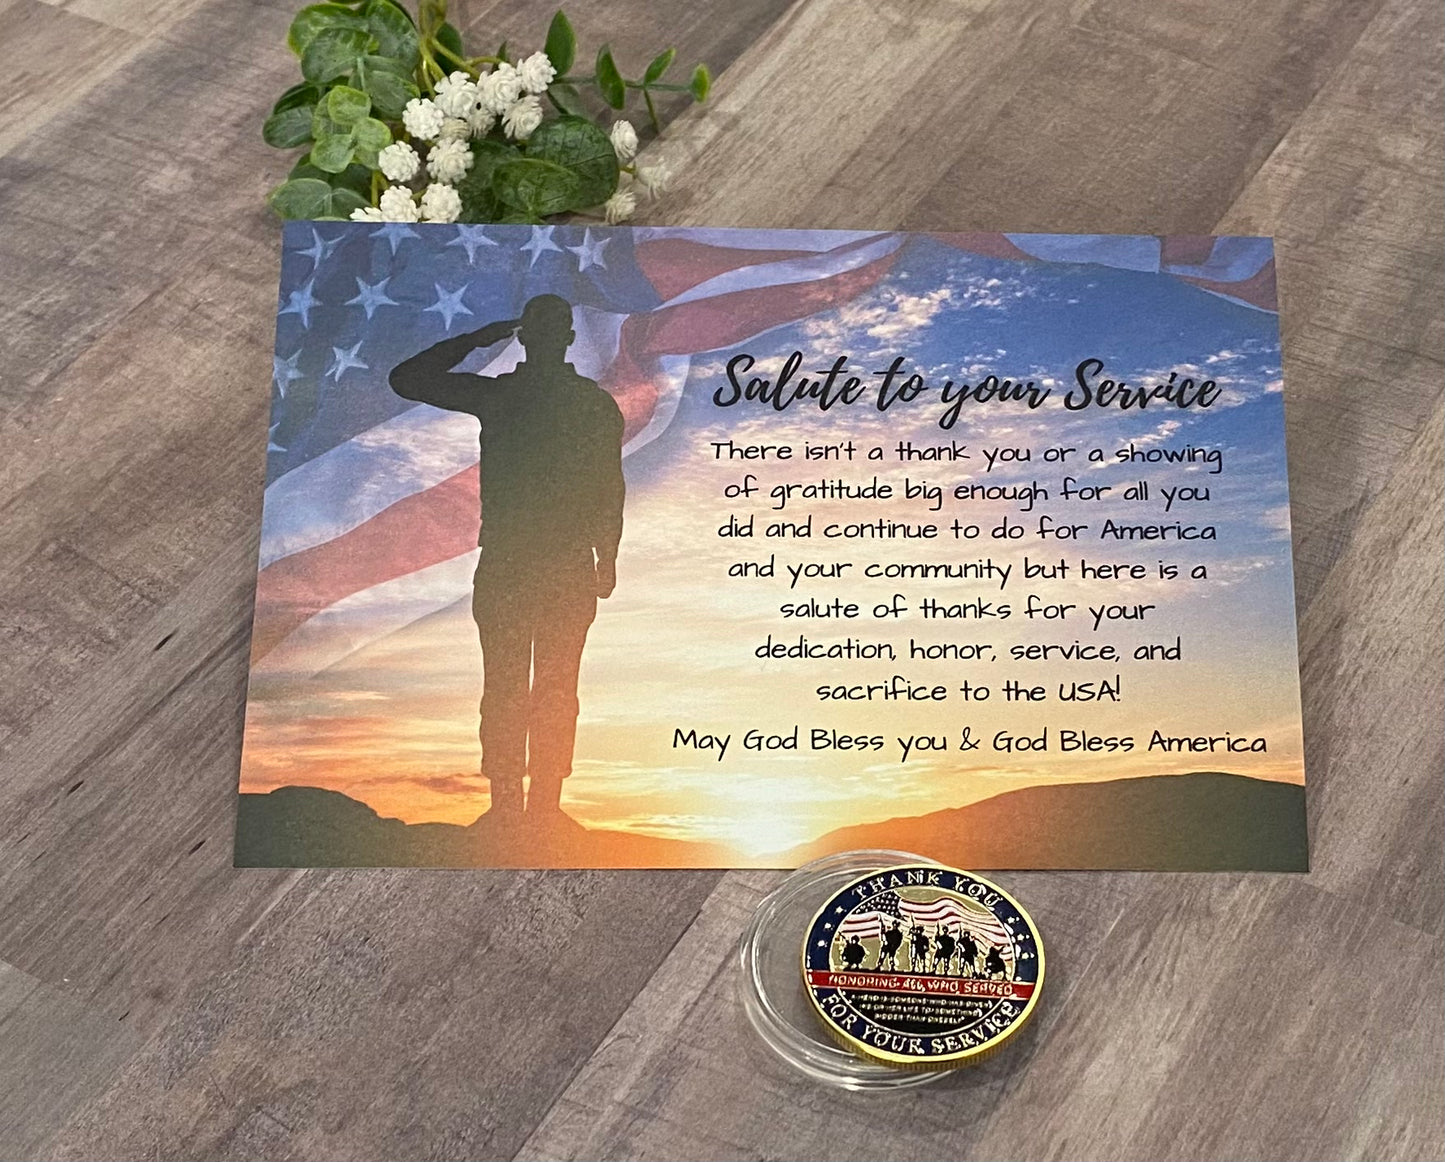 Salute to your Service - Military Thank You Note and Challenge Coin for Veterans